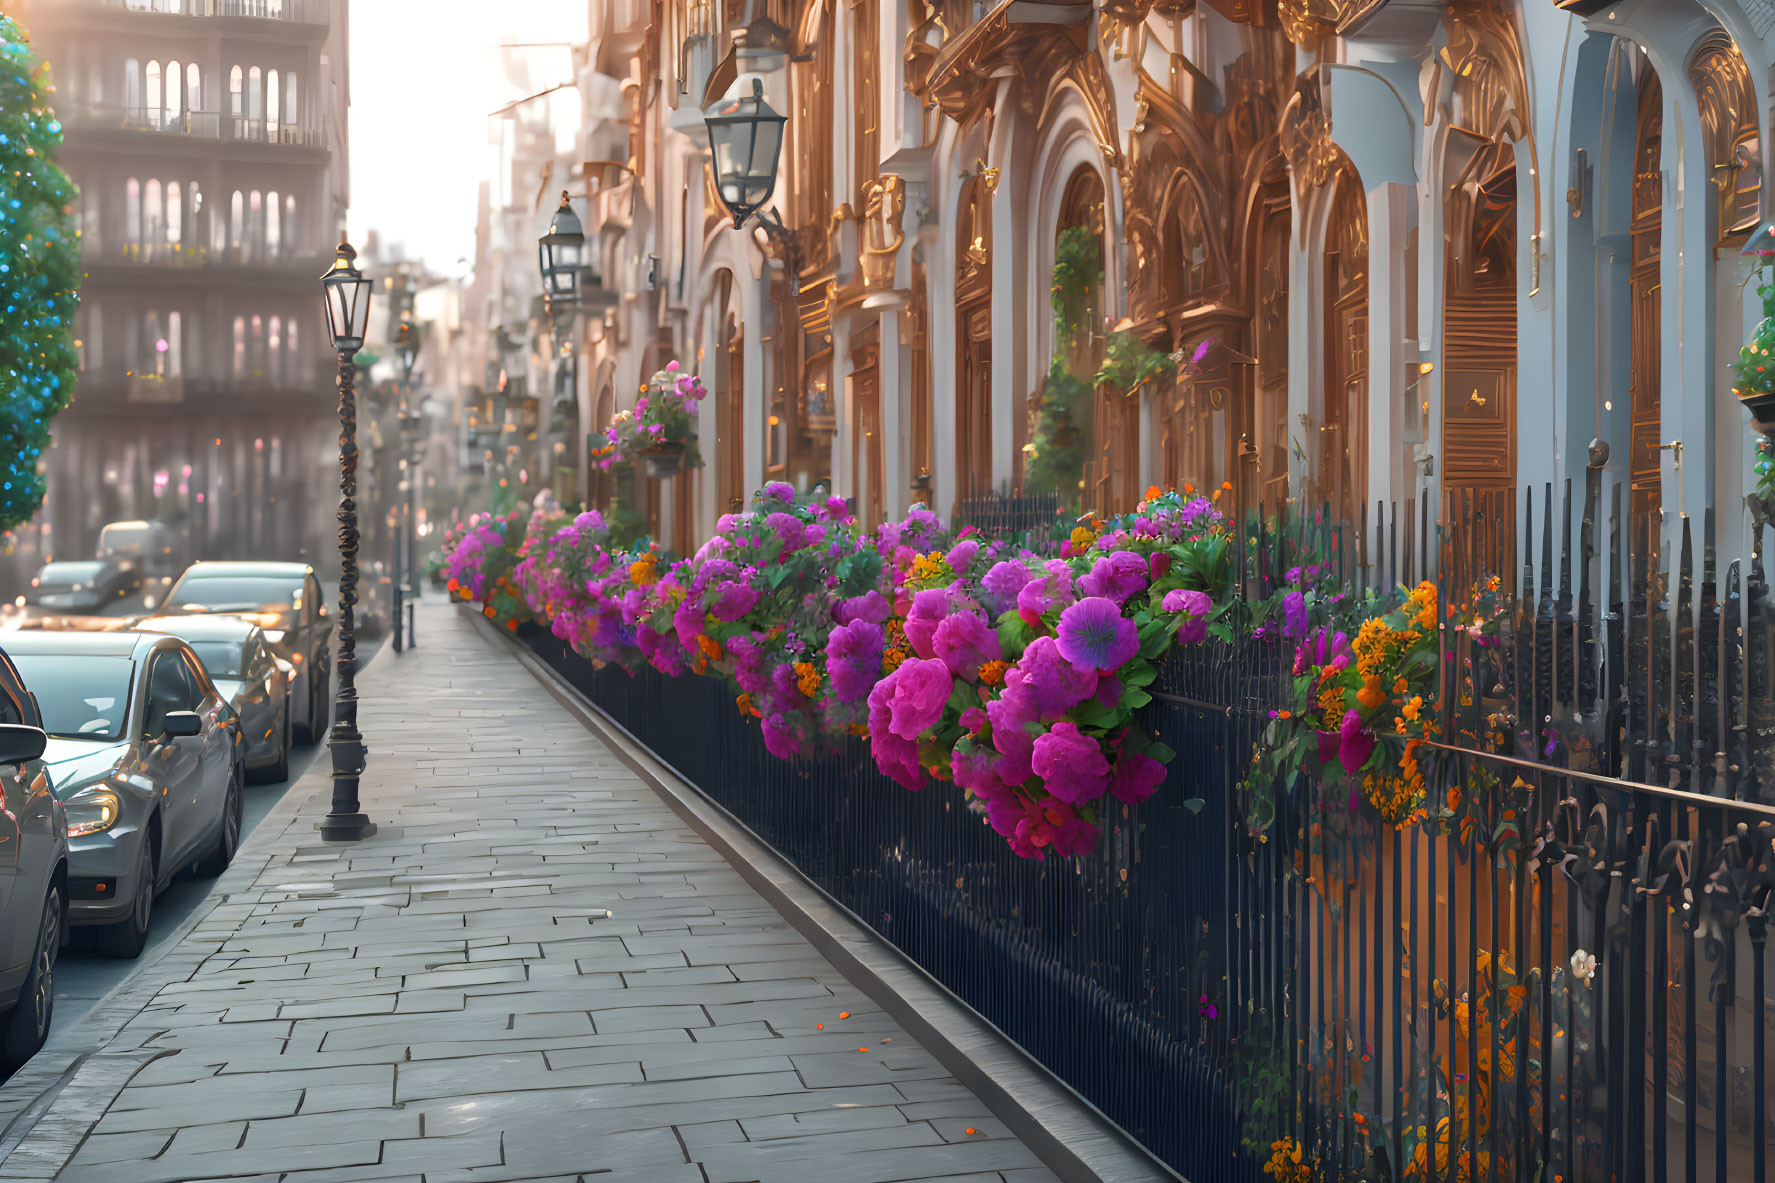 Vibrant flower arrangements adorn city street with soft glow of street lamps